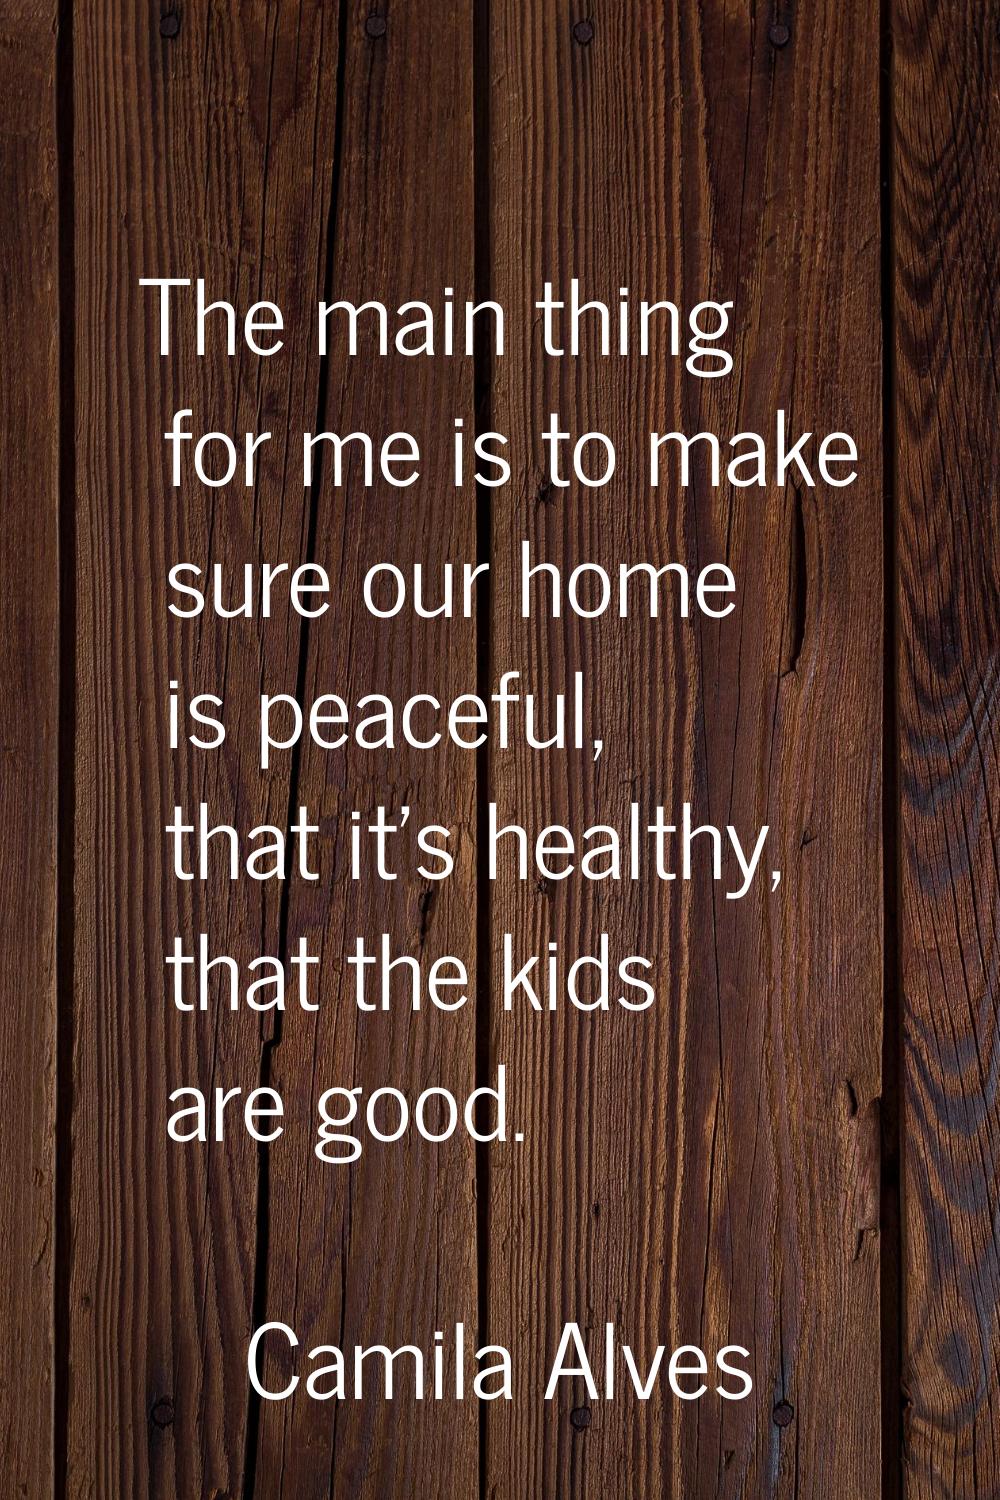 The main thing for me is to make sure our home is peaceful, that it's healthy, that the kids are go